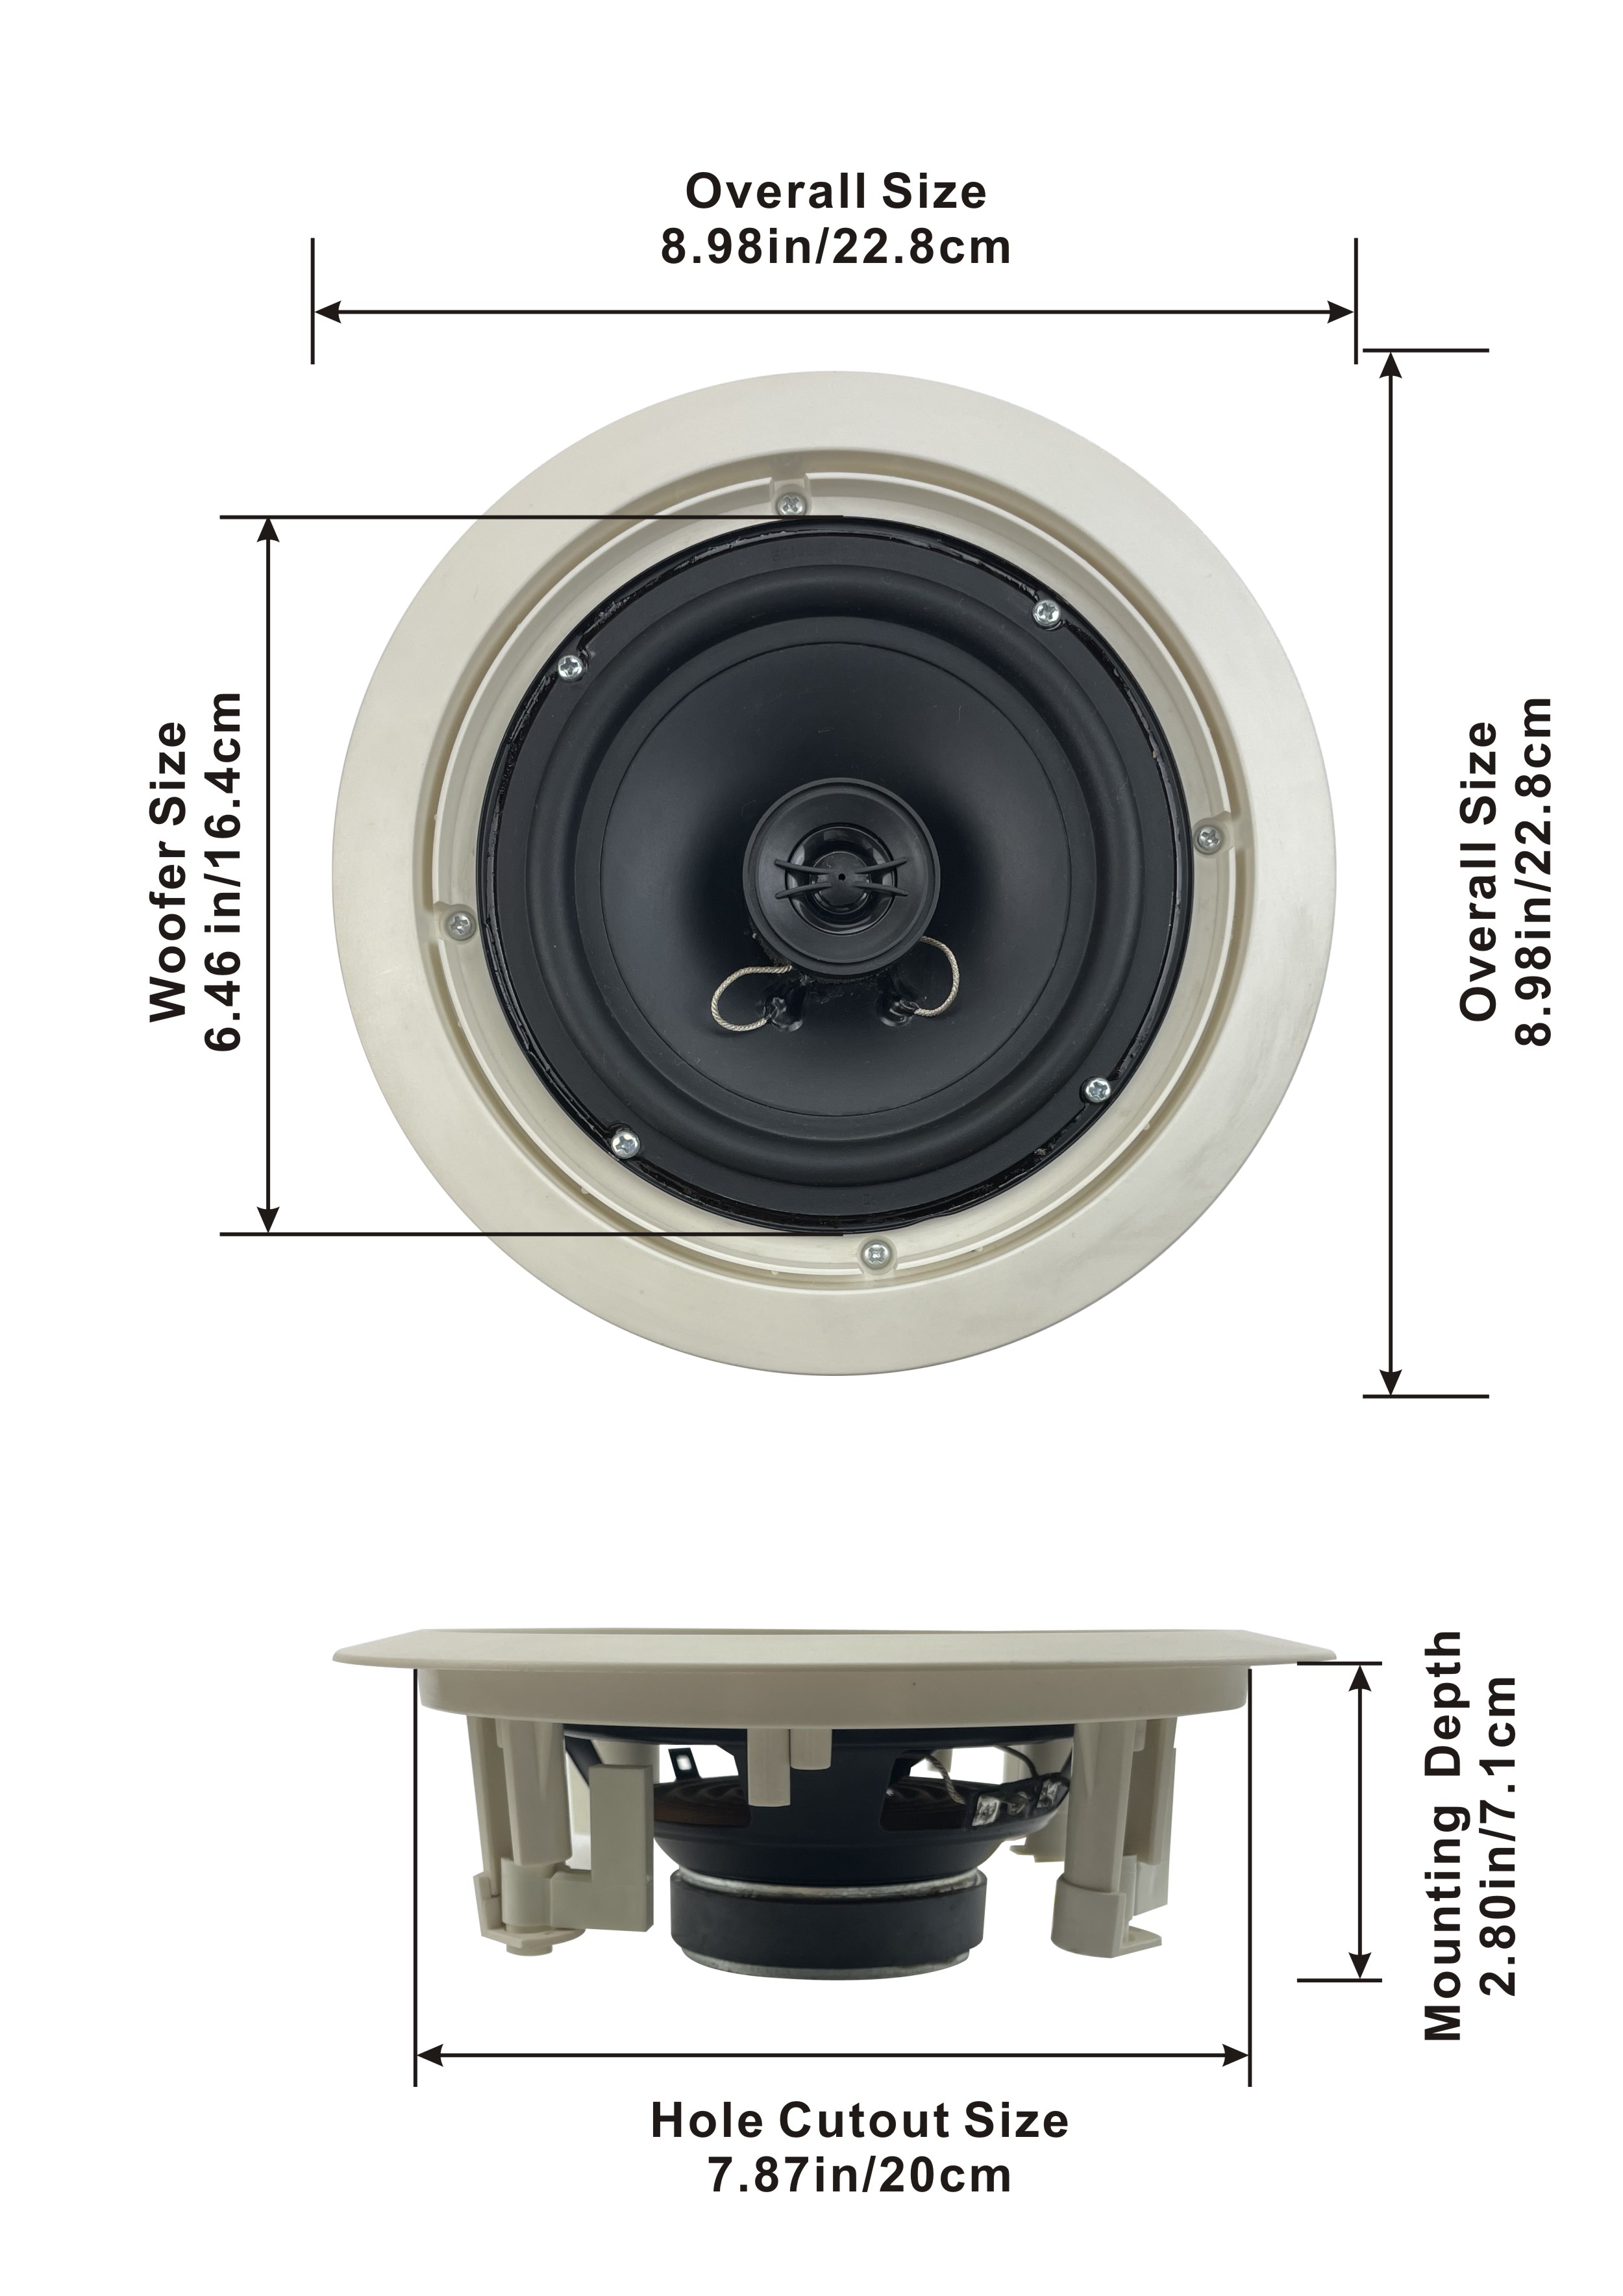 Acoustic Audio HTI6c Flush Mount In Ceiling Speakers with 6.5" Woofers 9 Pair - image 2 of 4